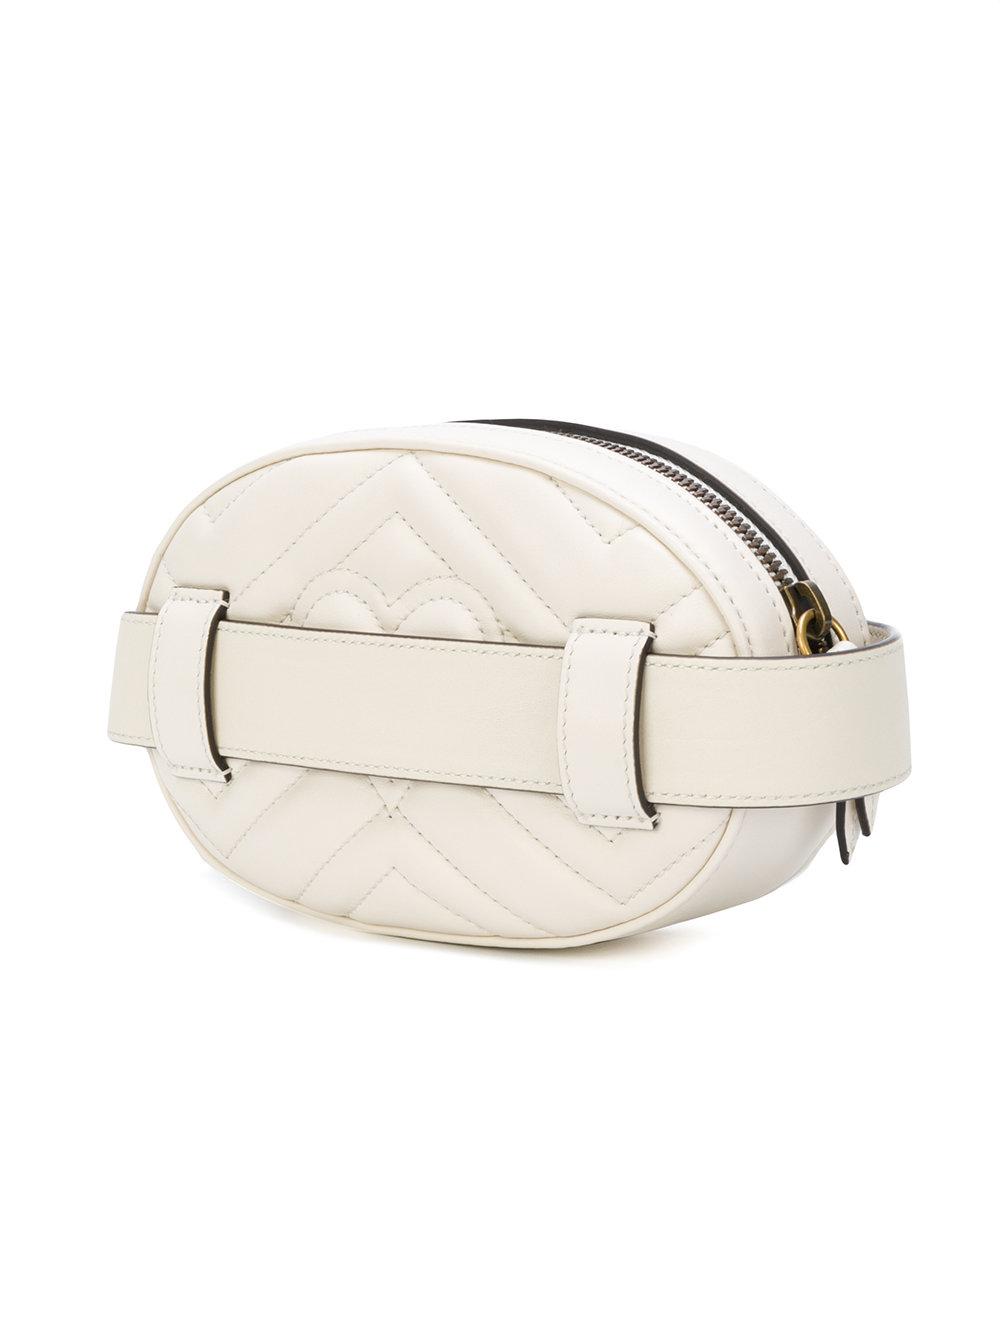 Gucci Gg Marmont Belt Bag in White | Lyst